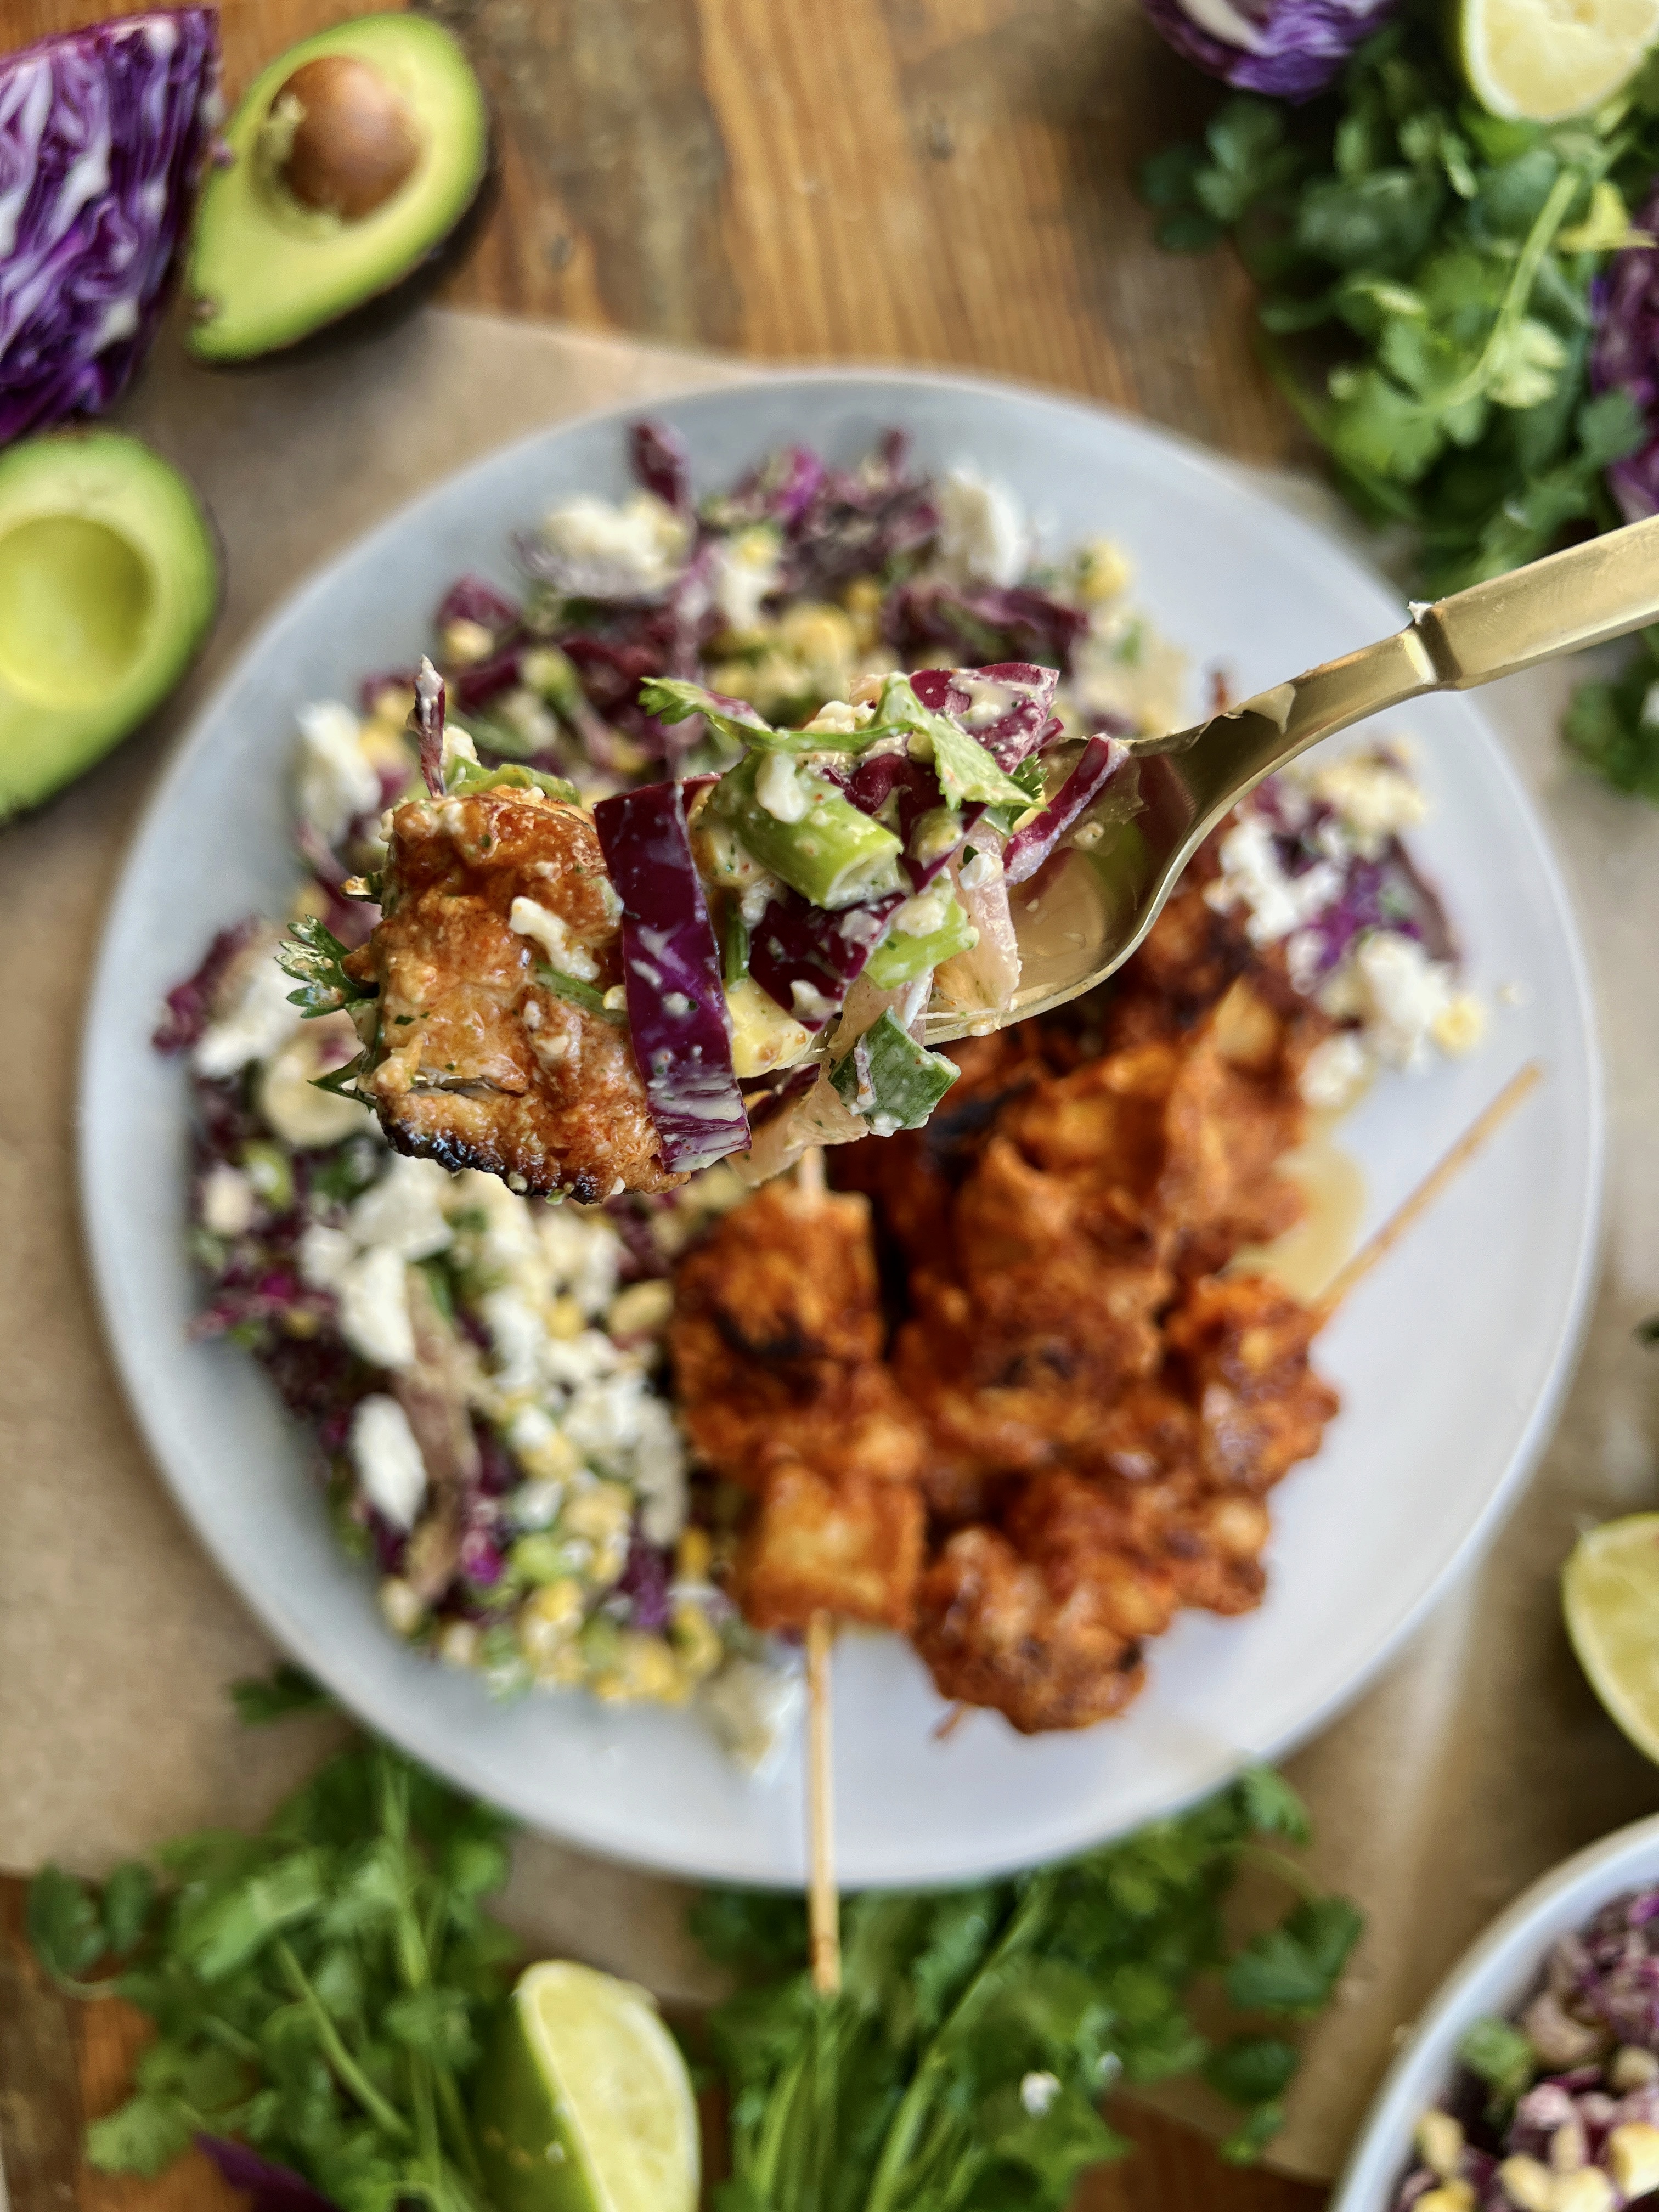 Chipotle Chicken Skewers with Elote Slaw, Chipotle Chicken Skewers with corn Slaw, Chipotle Chicken Skewers with Slaw, Chipotle Chicken Skewers with Esquites Slaw, Elote Slaw, elote cabbage slaw, esquites cabbage slaw, street corn slaw, street corn slaw and chicken, healthy mexican recipes, mexican chicken skewers, Chipotle Chicken Skewers, honey Chipotle Chicken Skewers, Chipotle Chicken Skewers salad, mexican Chicken Skewers salad, make ahead mexican recipes, healthy make ahead mexican recipes, entertaining make ahead mexican recipes, meal prep make ahead mexican recipes, dinner party make ahead mexican recipes, on annie’s menu, onanniesmenu, on annies menu,